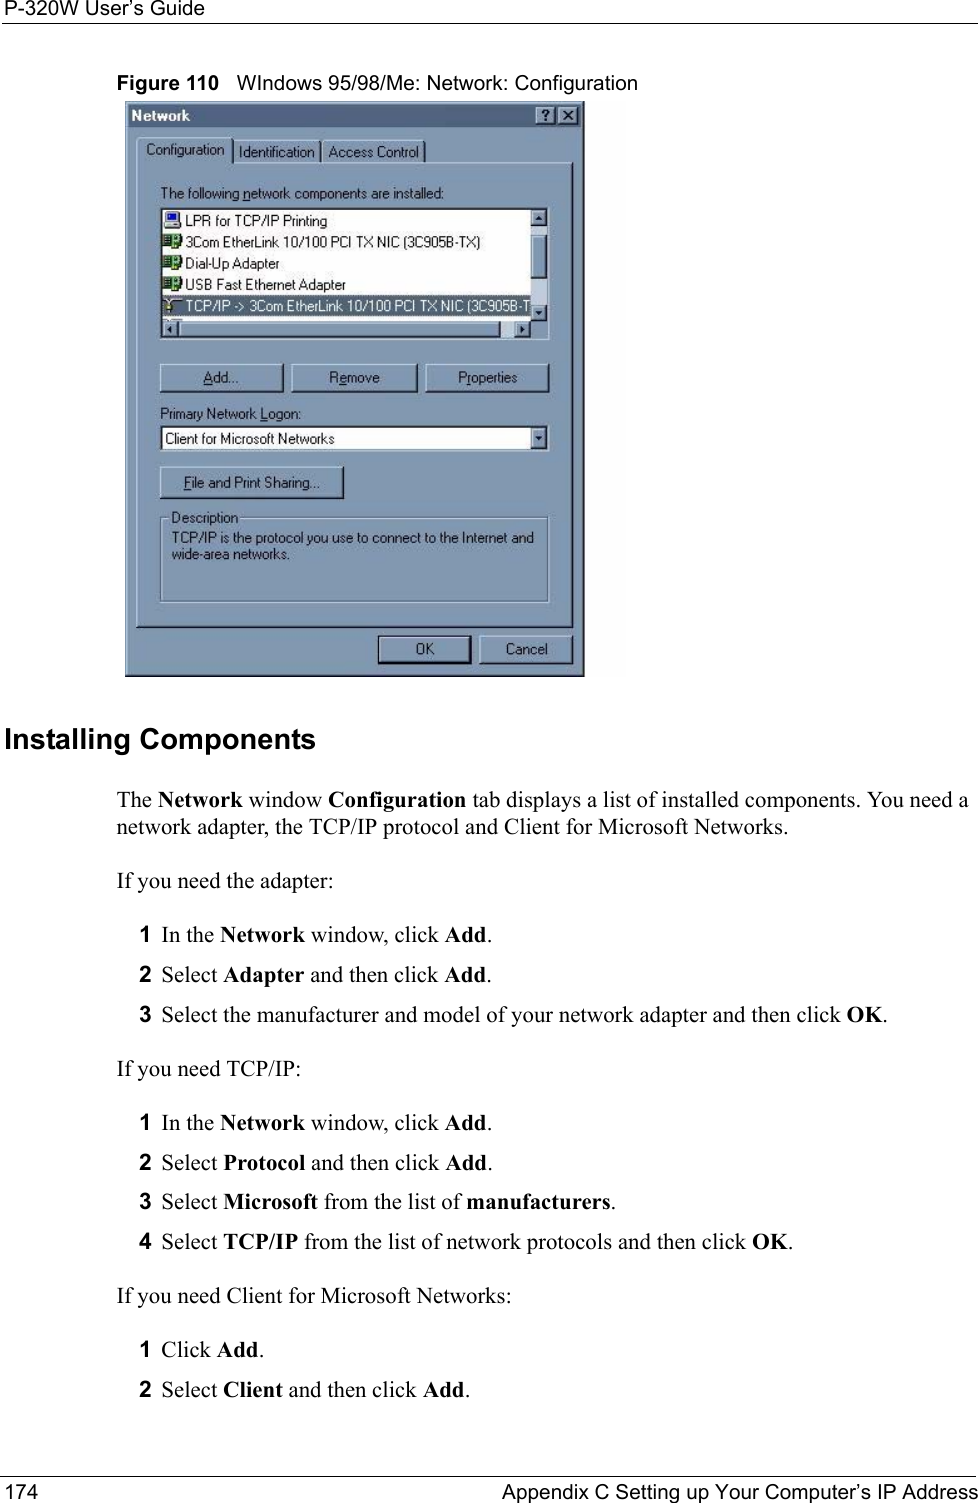 P-320W User’s Guide174  Appendix C Setting up Your Computer’s IP AddressFigure 110   WIndows 95/98/Me: Network: ConfigurationInstalling ComponentsThe Network window Configuration tab displays a list of installed components. You need a network adapter, the TCP/IP protocol and Client for Microsoft Networks.If you need the adapter:1In the Network window, click Add.2Select Adapter and then click Add.3Select the manufacturer and model of your network adapter and then click OK.If you need TCP/IP:1In the Network window, click Add.2Select Protocol and then click Add.3Select Microsoft from the list of manufacturers.4Select TCP/IP from the list of network protocols and then click OK.If you need Client for Microsoft Networks:1Click Add.2Select Client and then click Add.